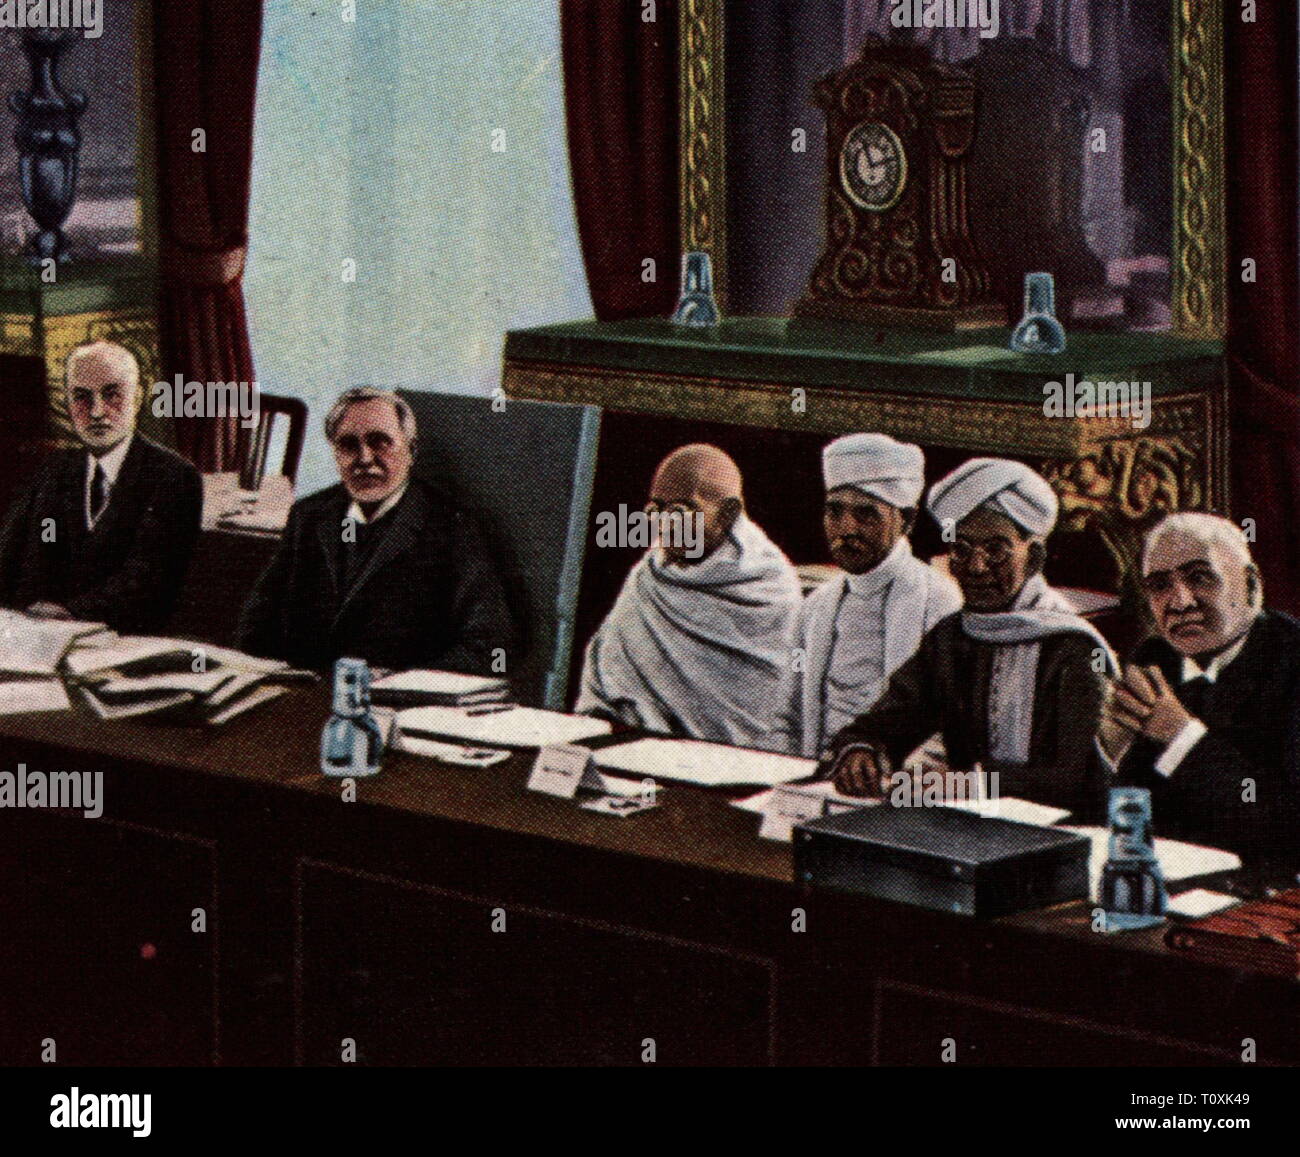 politics, conference, British Indian Round Table Conferencen, second conference, opening, London, 7.9.1931, Mahatma Gandhi next to the British Prime Minister Ramsay MacDonald, coloured photograph, cigarette card, series 'Die Nachkriegszeit', 1935, colonialism, colony, colonies, reform, reforms, negotiations, British empire, British India, British Indian round Table conference, Round Table, politician, politicians, people, 20th century, 1930s, politics, policy, conference, conferences, opening, openings, Prime Minister, Prime Ministers, coloured, , Additional-Rights-Clearance-Info-Not-Available Stock Photo